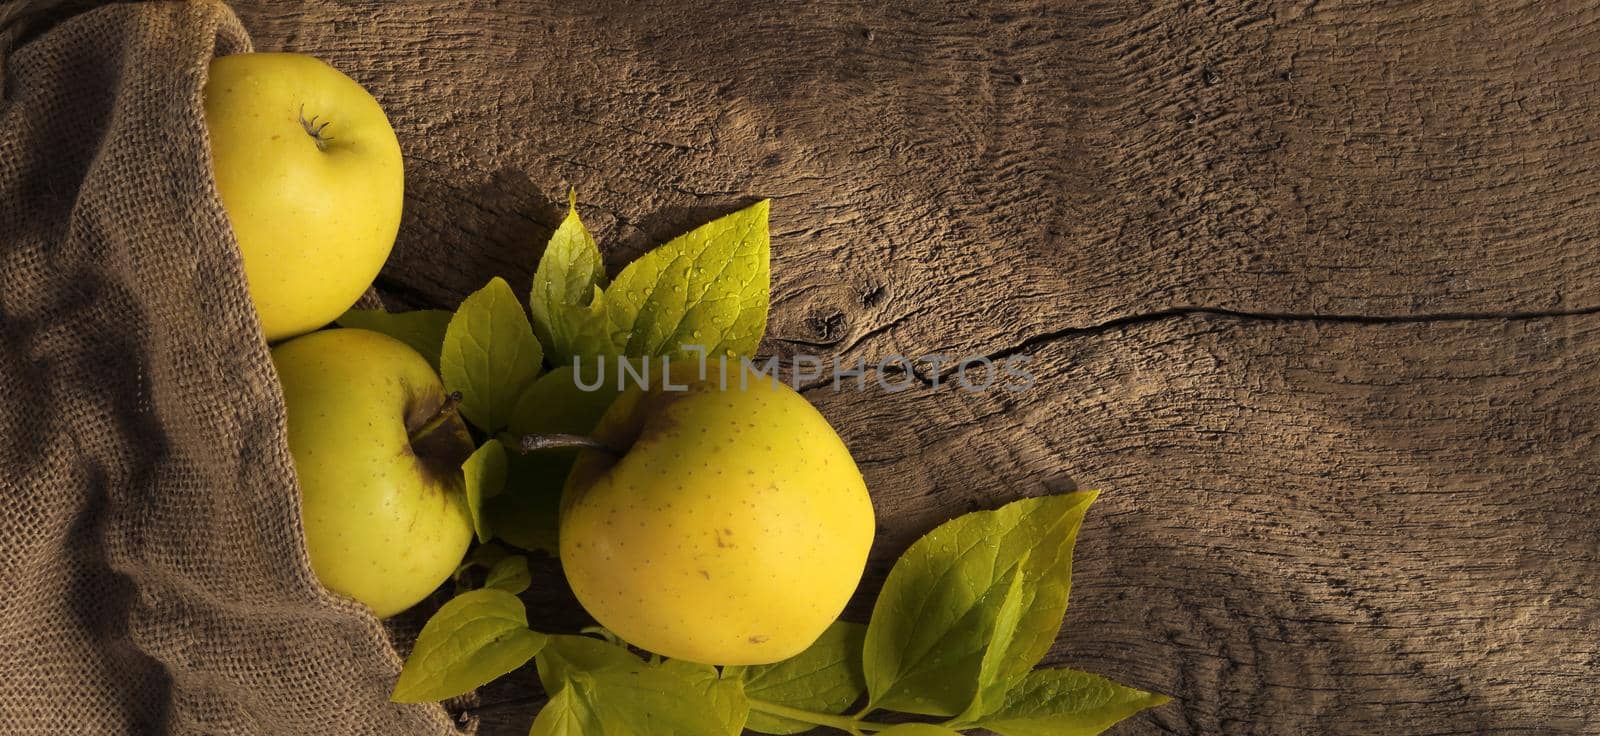 Rustic background with green yellow apples, canvas bag on old wood background. Horizontal flat lay, above view